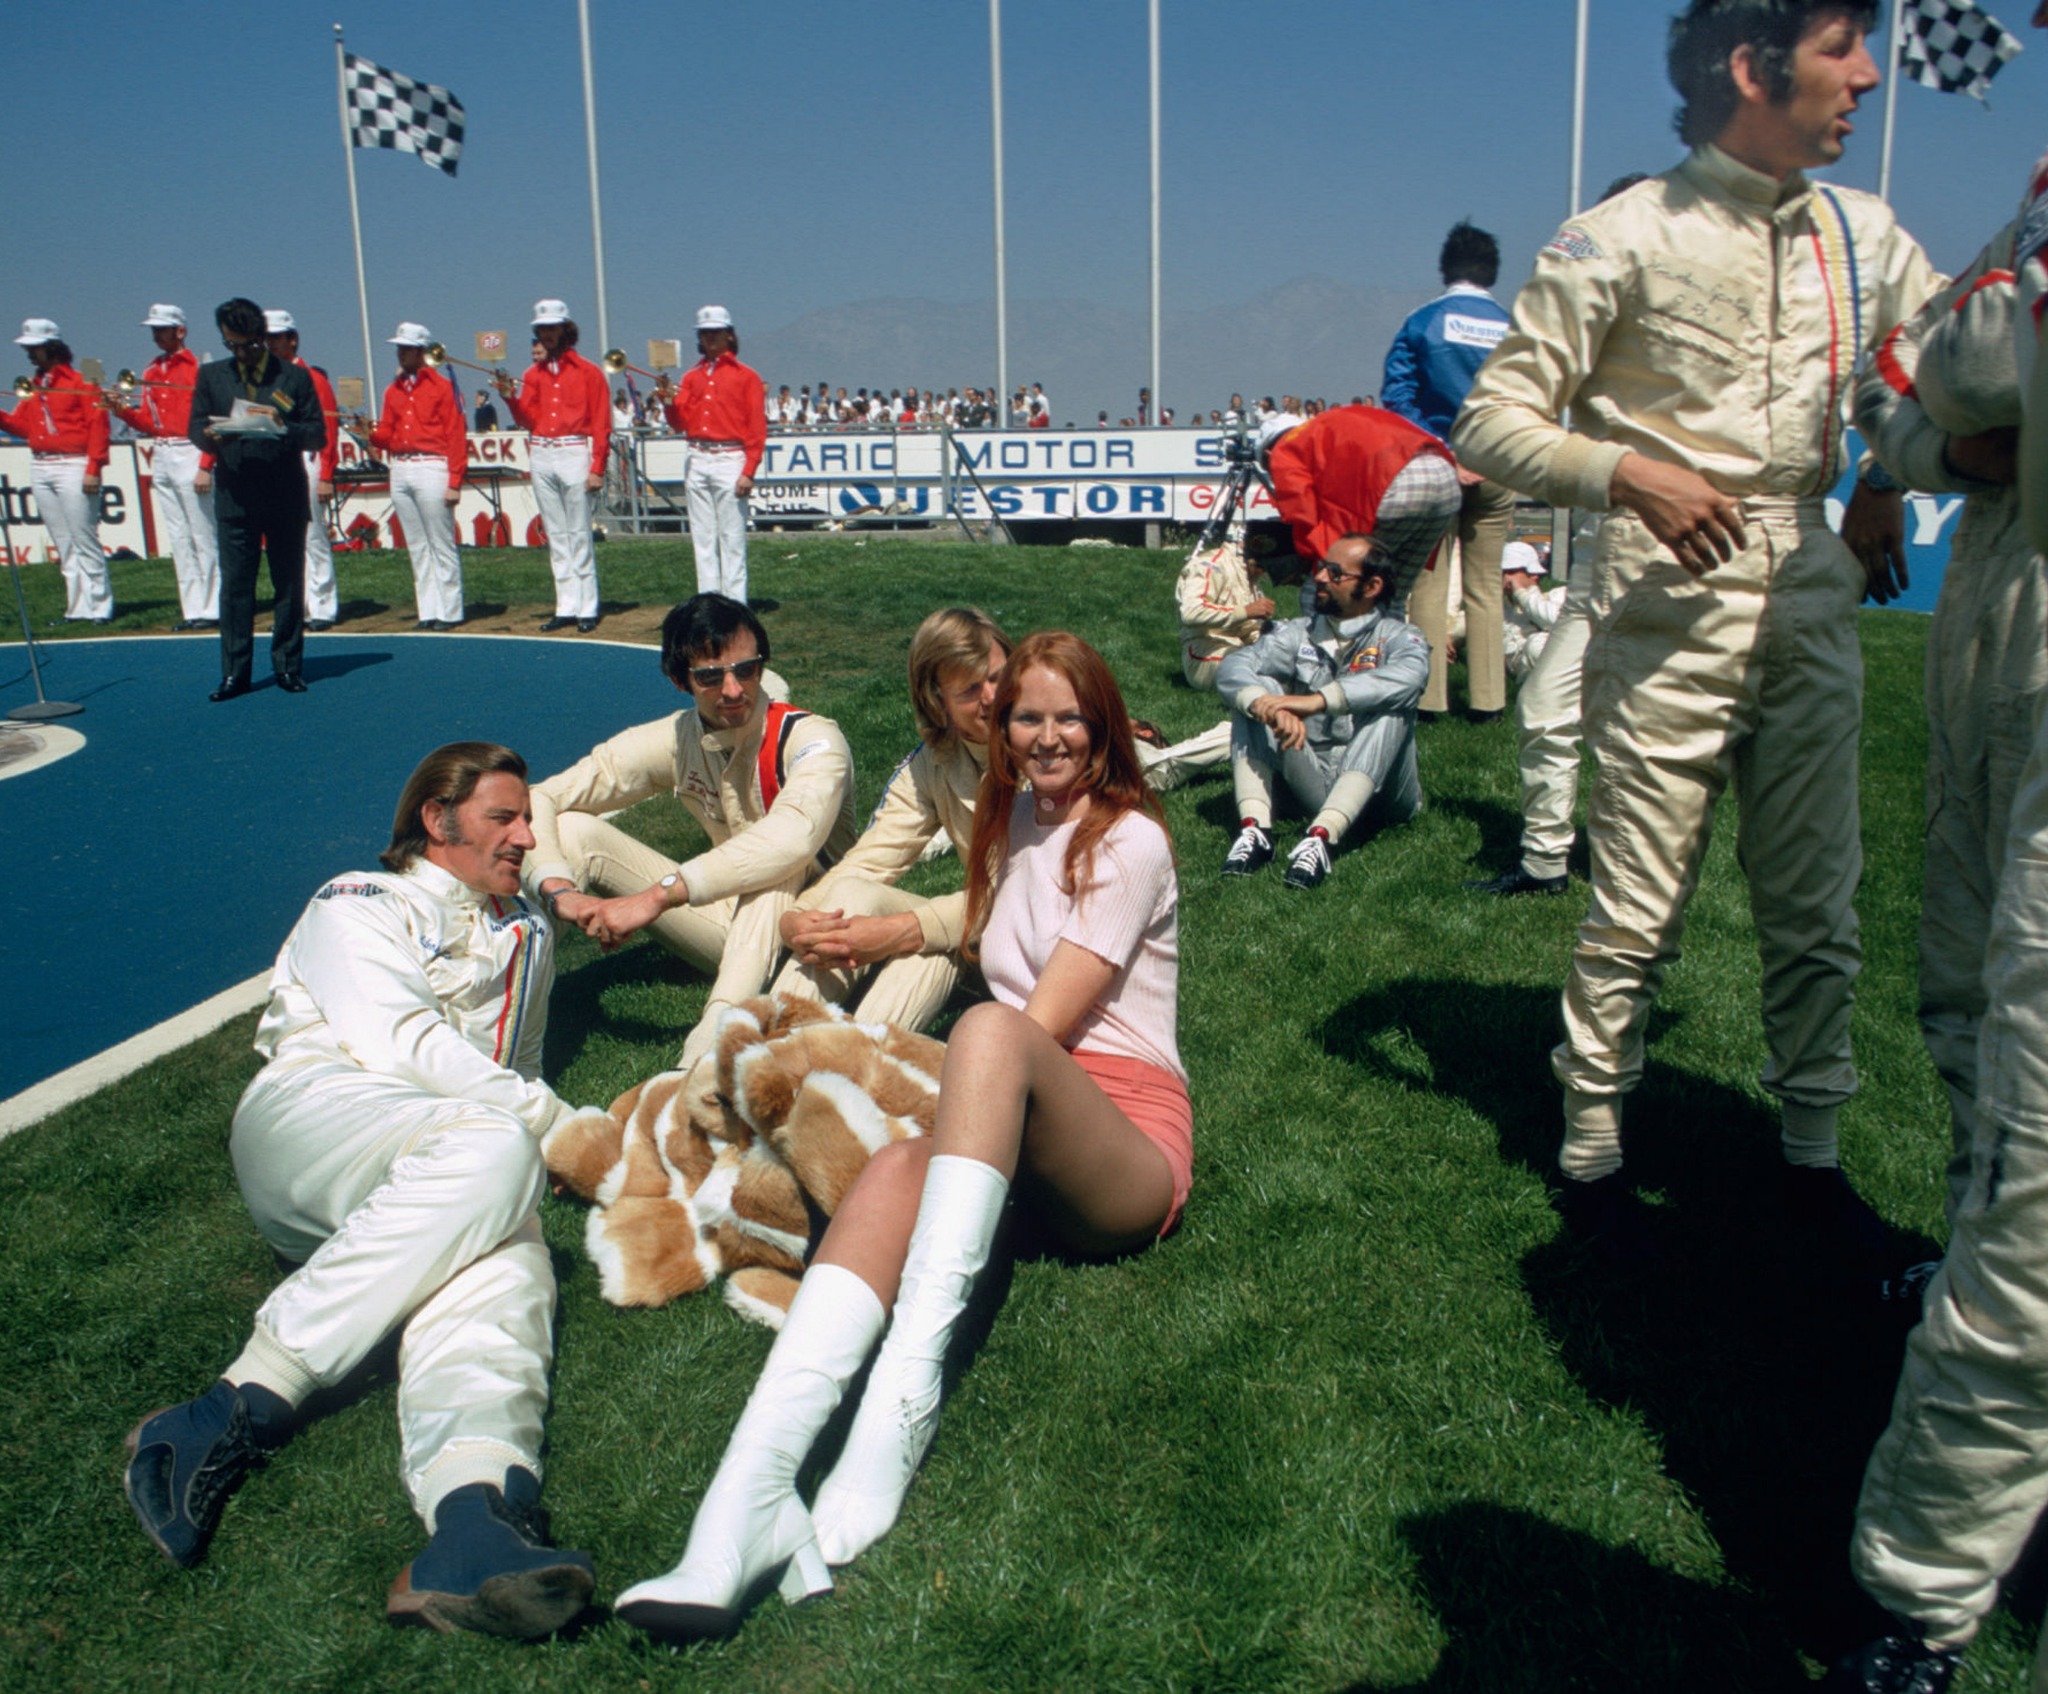 Graham Hill, Tim Schenken (with sunglasses), Ronnie Peterson (between Tim and unknown woman), Henri Pescarolo (with sunglasses, in gray jumpsuit) and Howden Ganley (standing) at the Questor Grand Prix at the Ontario Motor Speedway in California, USA, on 28 March 1971.